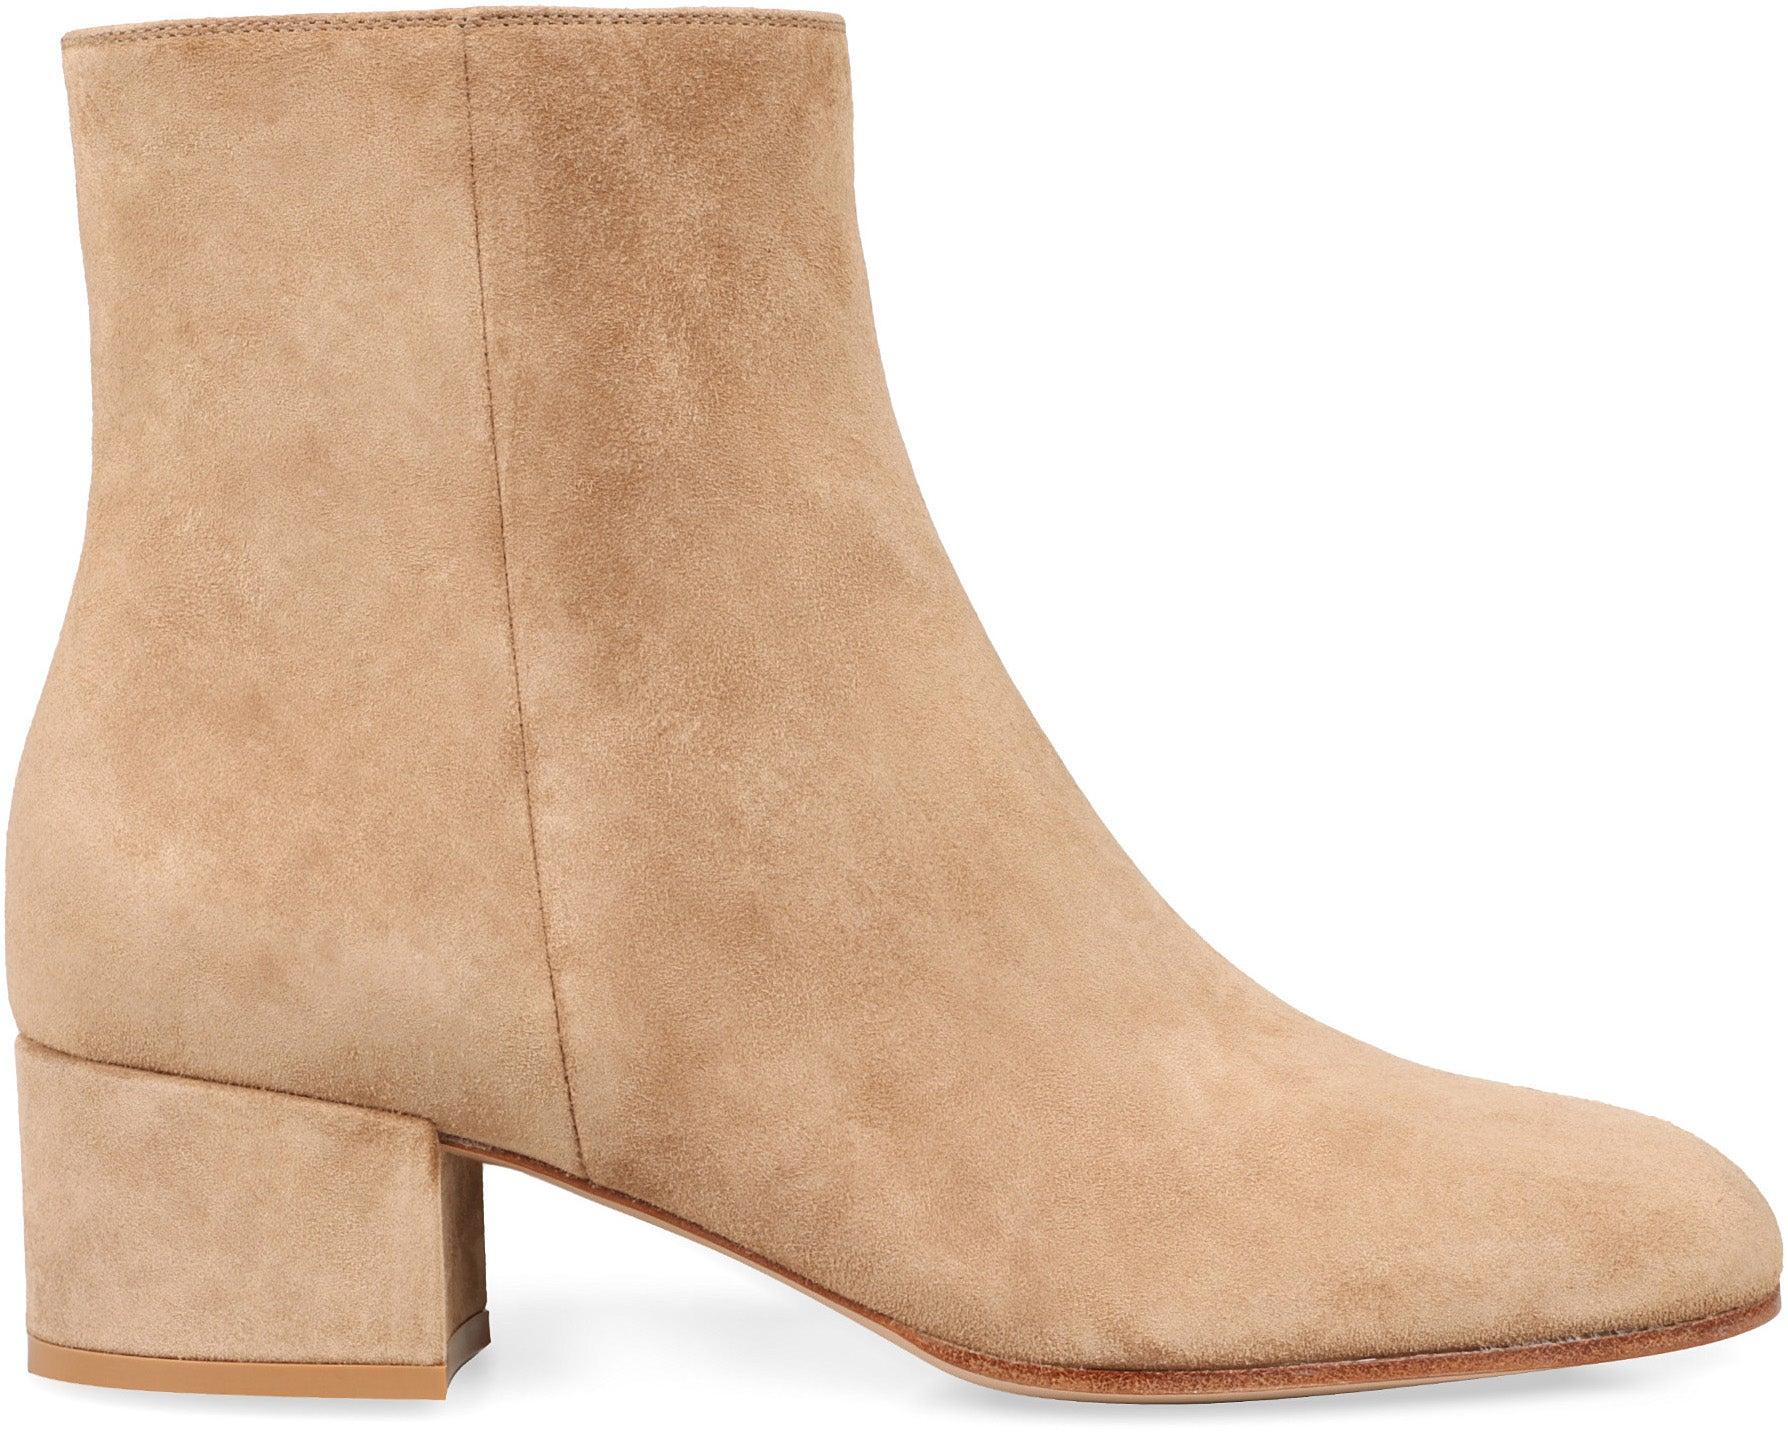 Gianvito Rossi Margaux Mid Bootie Ankle Boots in Brown | Lyst